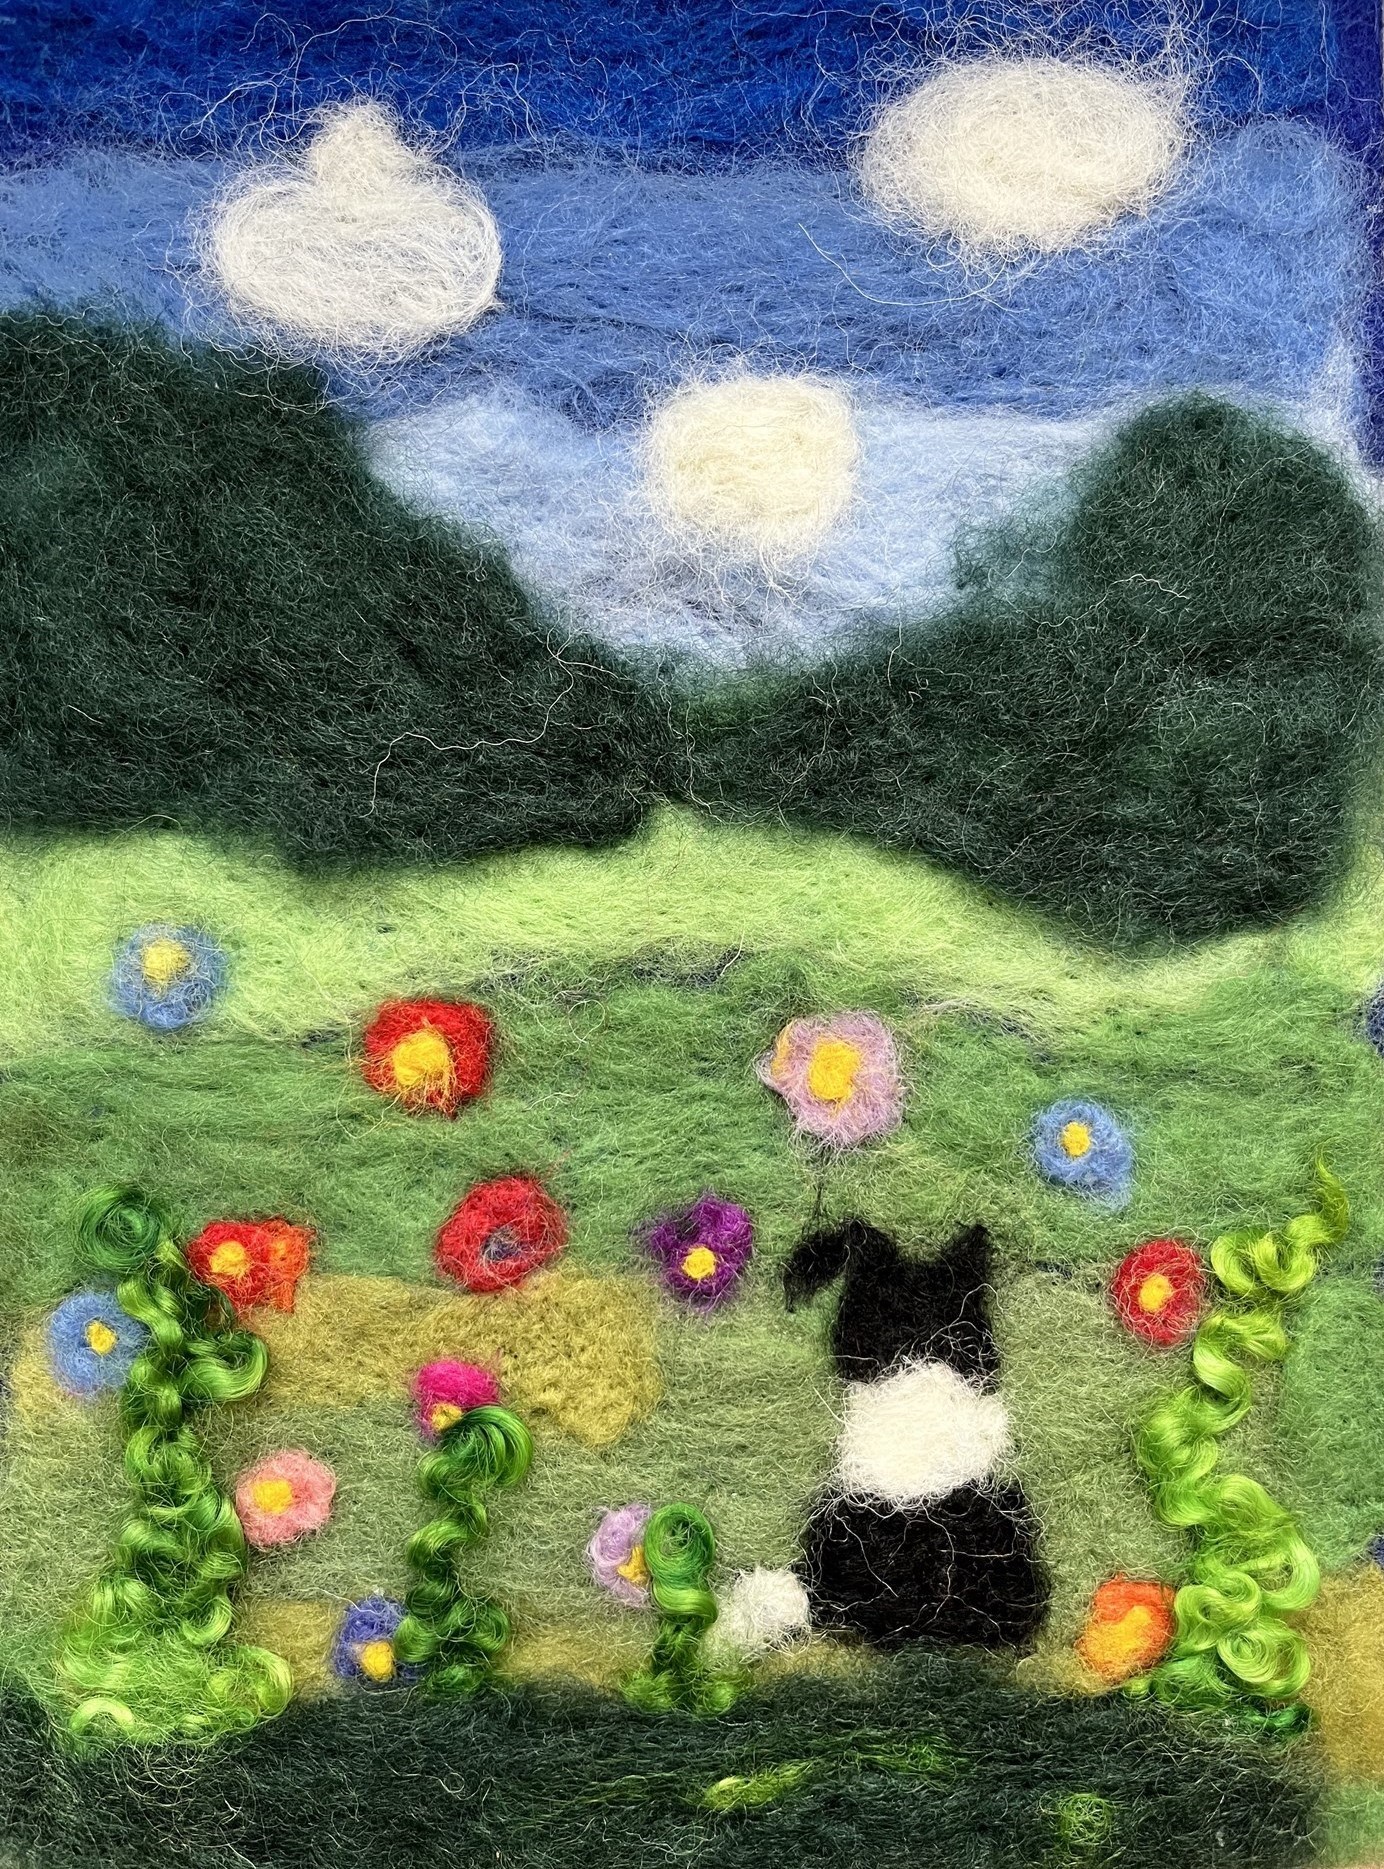 Painting with Wool: The Art of Felting - Artists for Kids